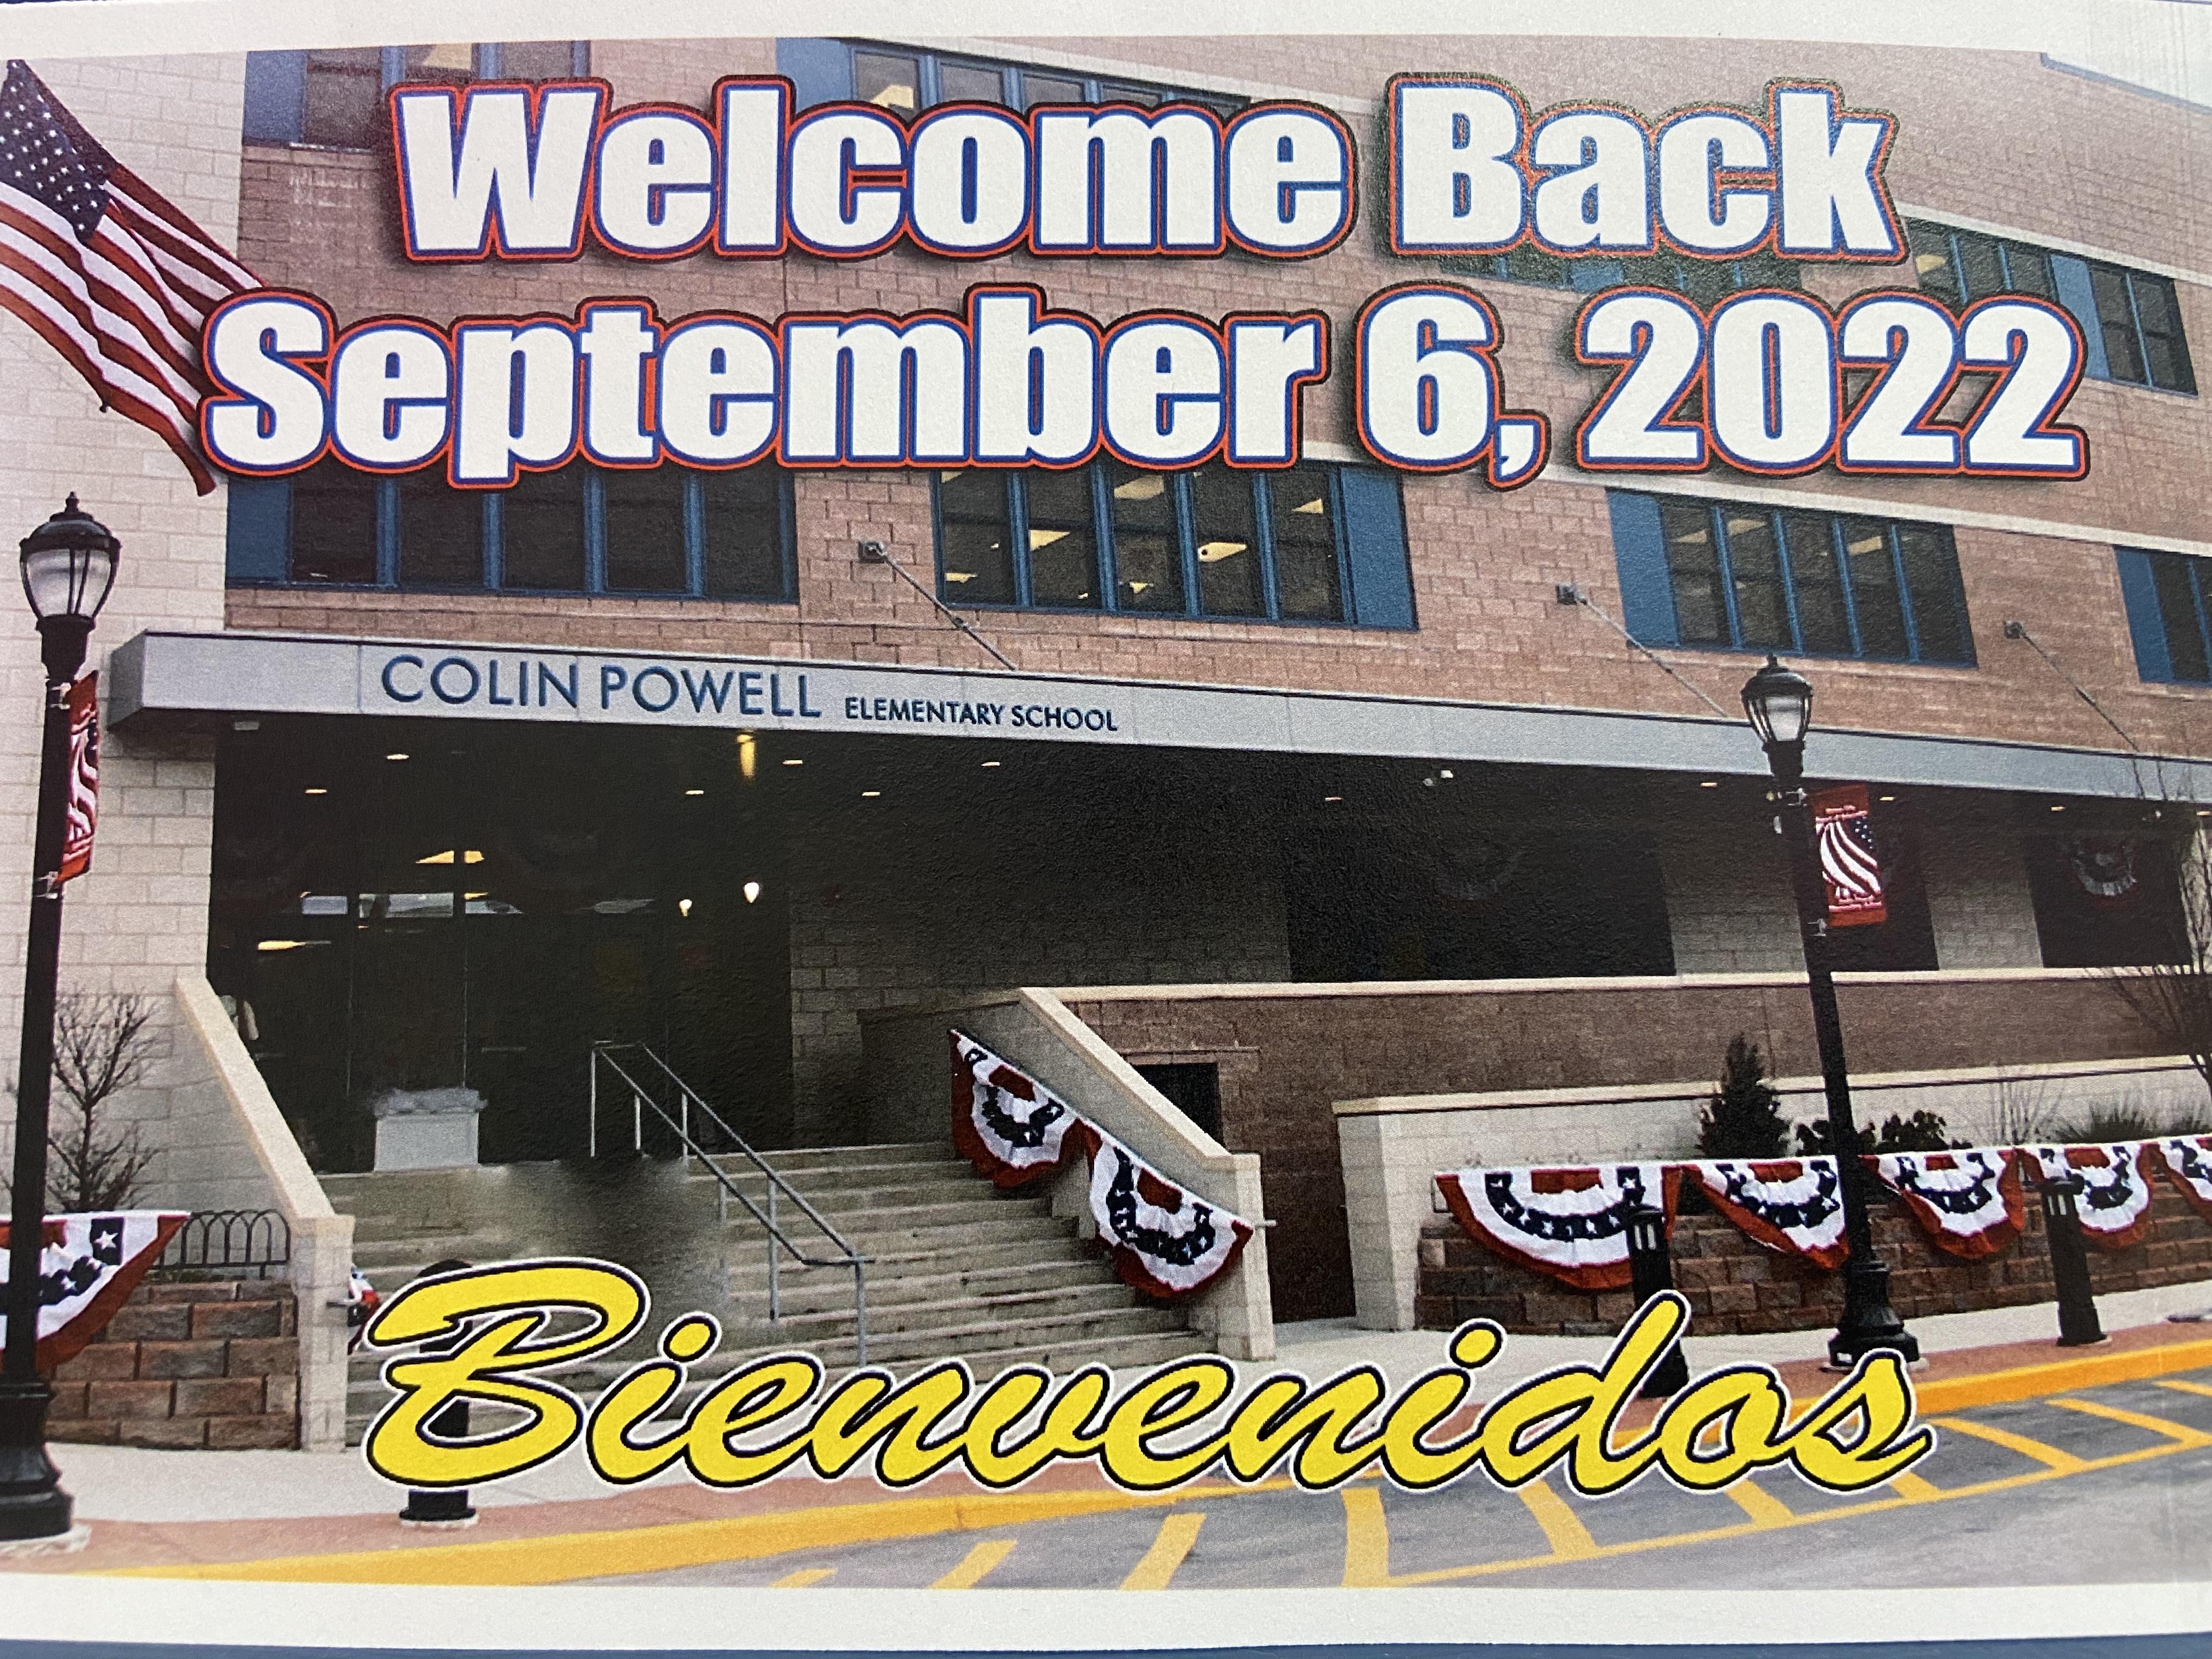 Welcome Back-September 6, 2022-Colin Powell School